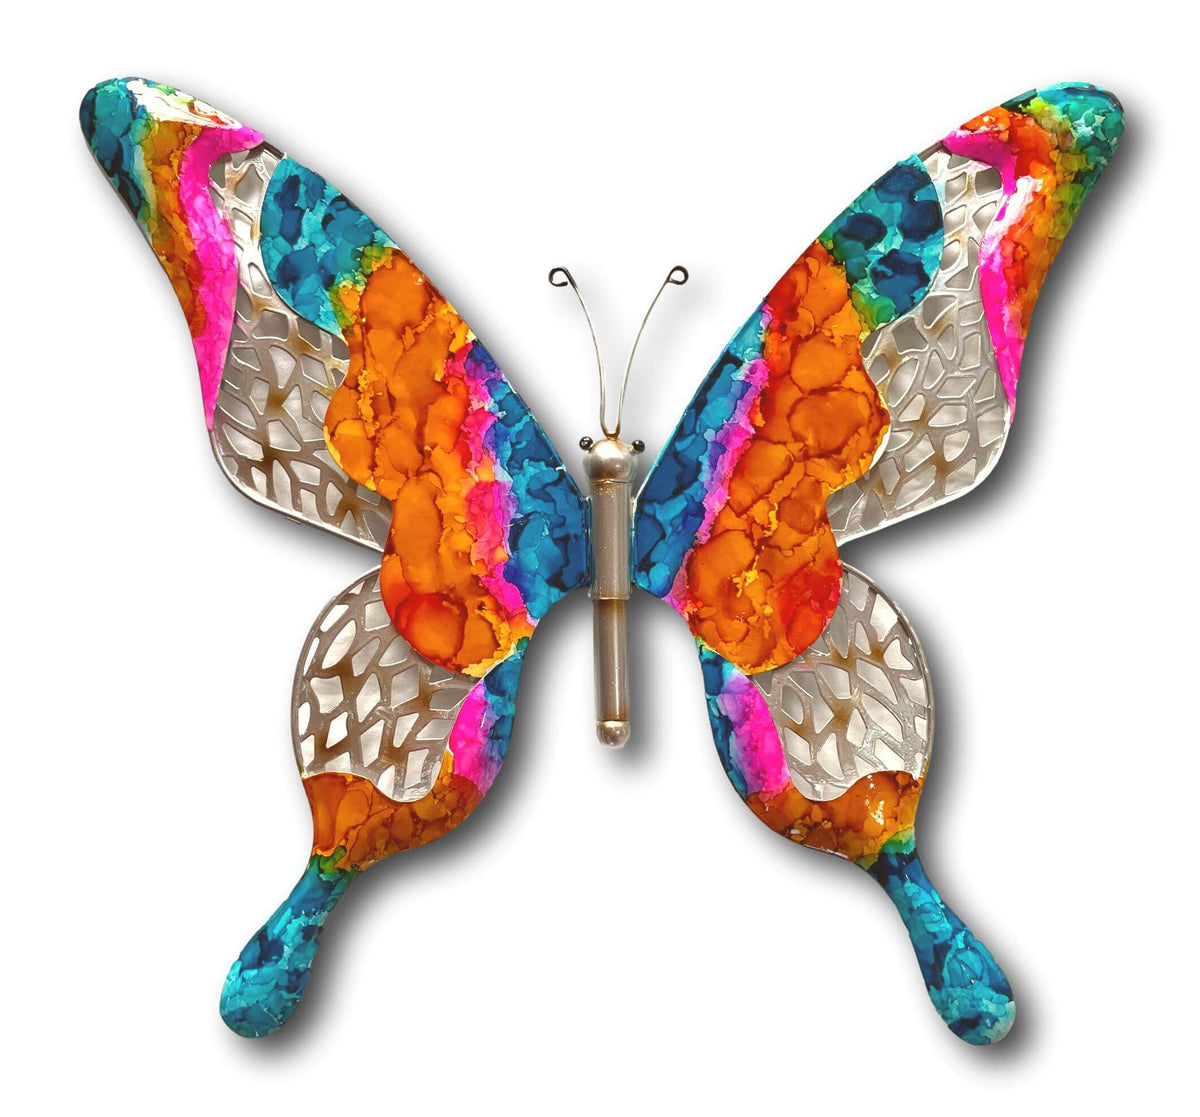 TWO COLOURFUL BUTTERFLY’S WALL ART SET - HANDMADE METAL ART + SINGING BOWLS AND MEDITATION